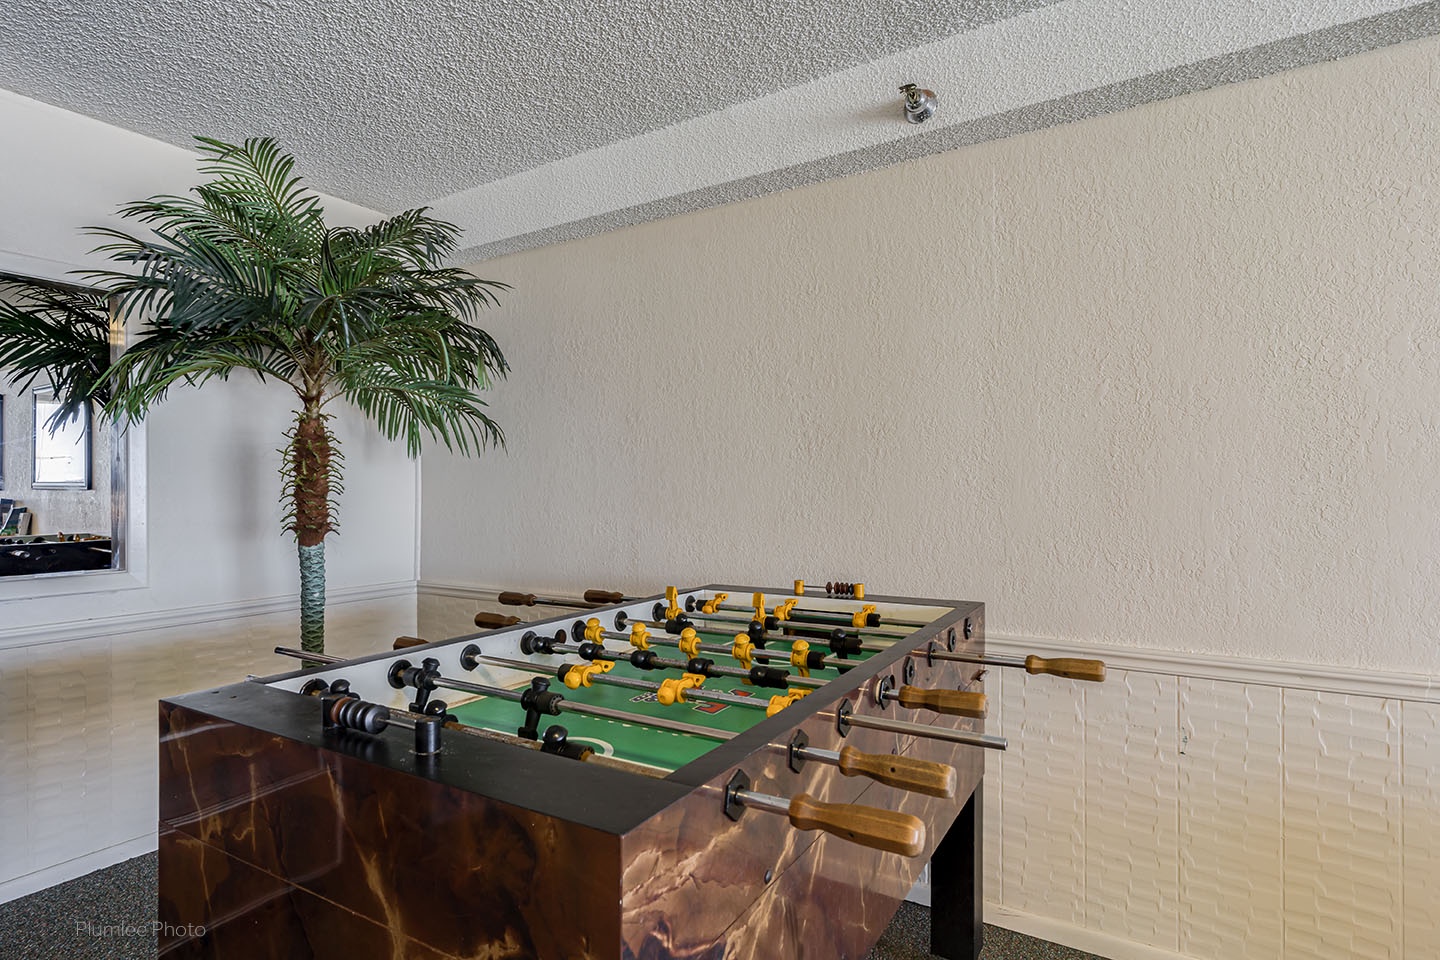 The fusball table in the Community Room